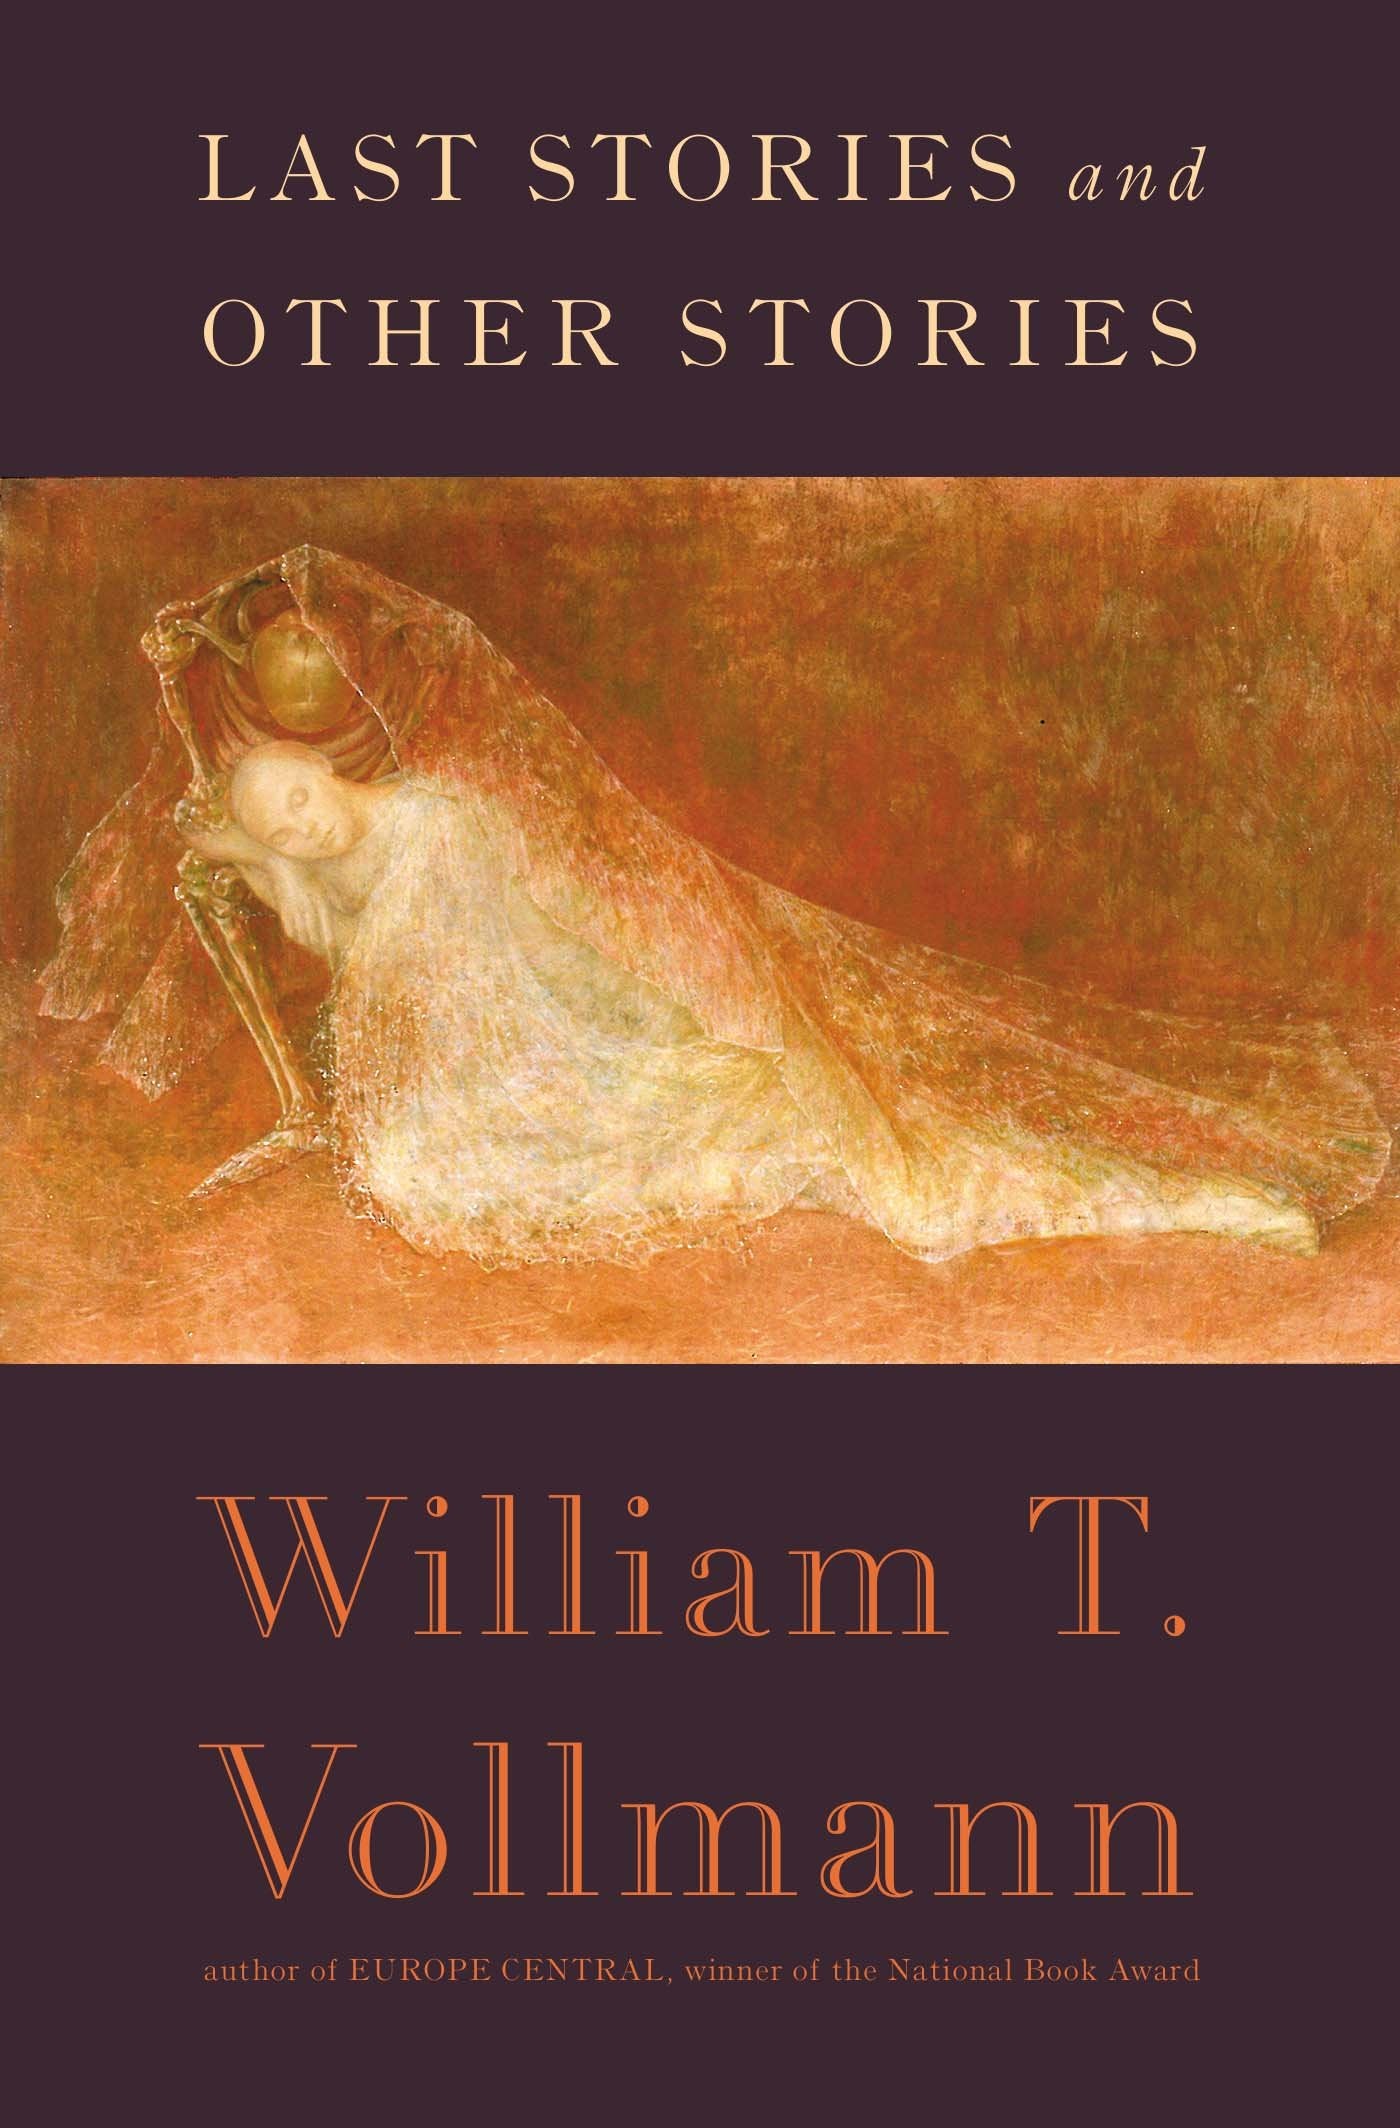 Last Stories and Other Stories, by William T. Vollmann